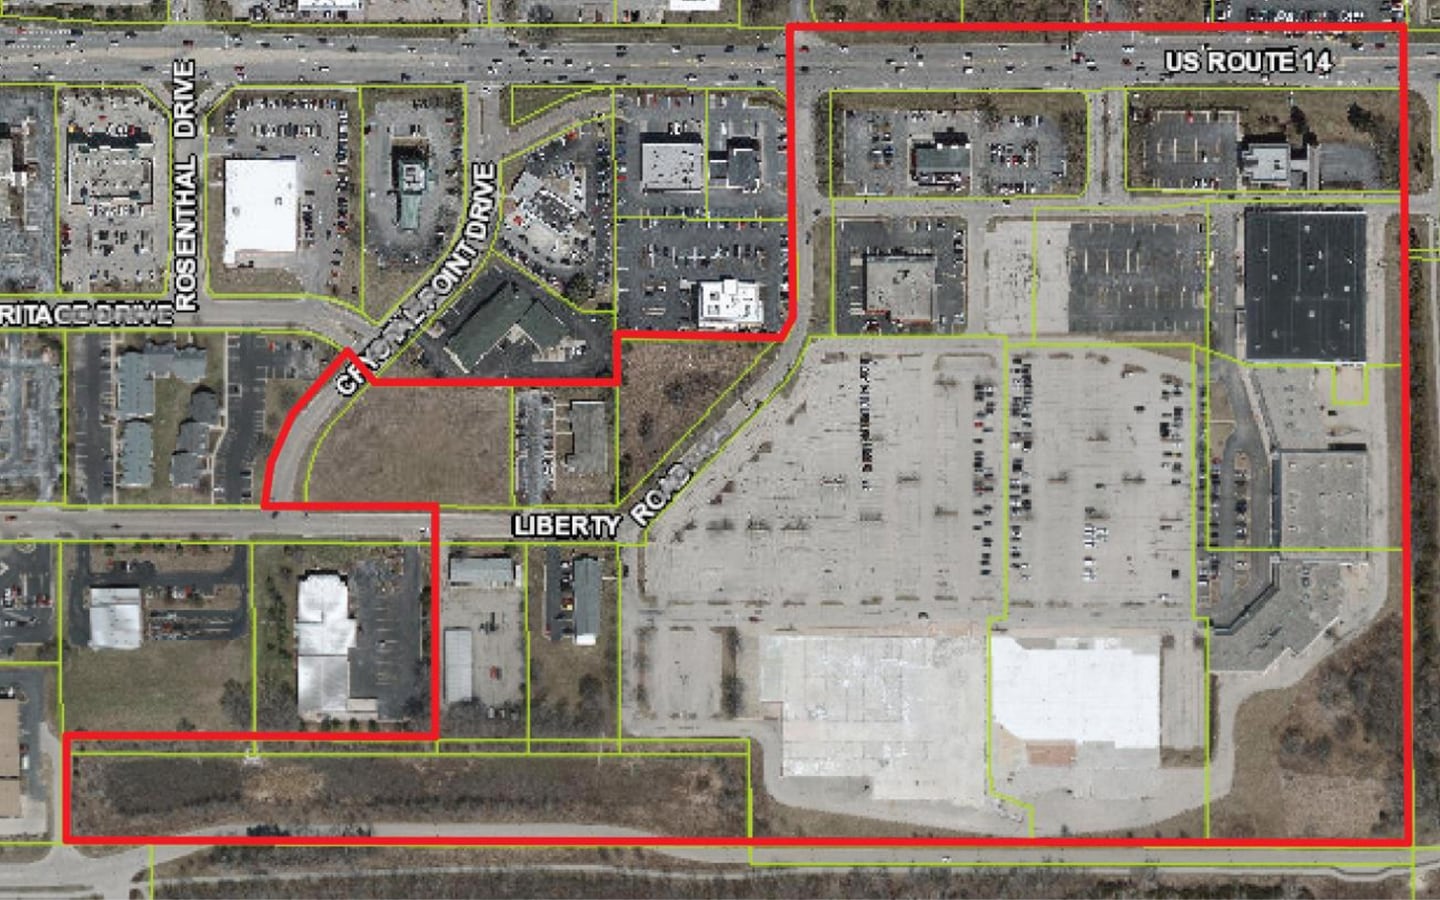 A draft TIF redevelopment plan shows the proposed boundaries of the Water's Edge TIF district.